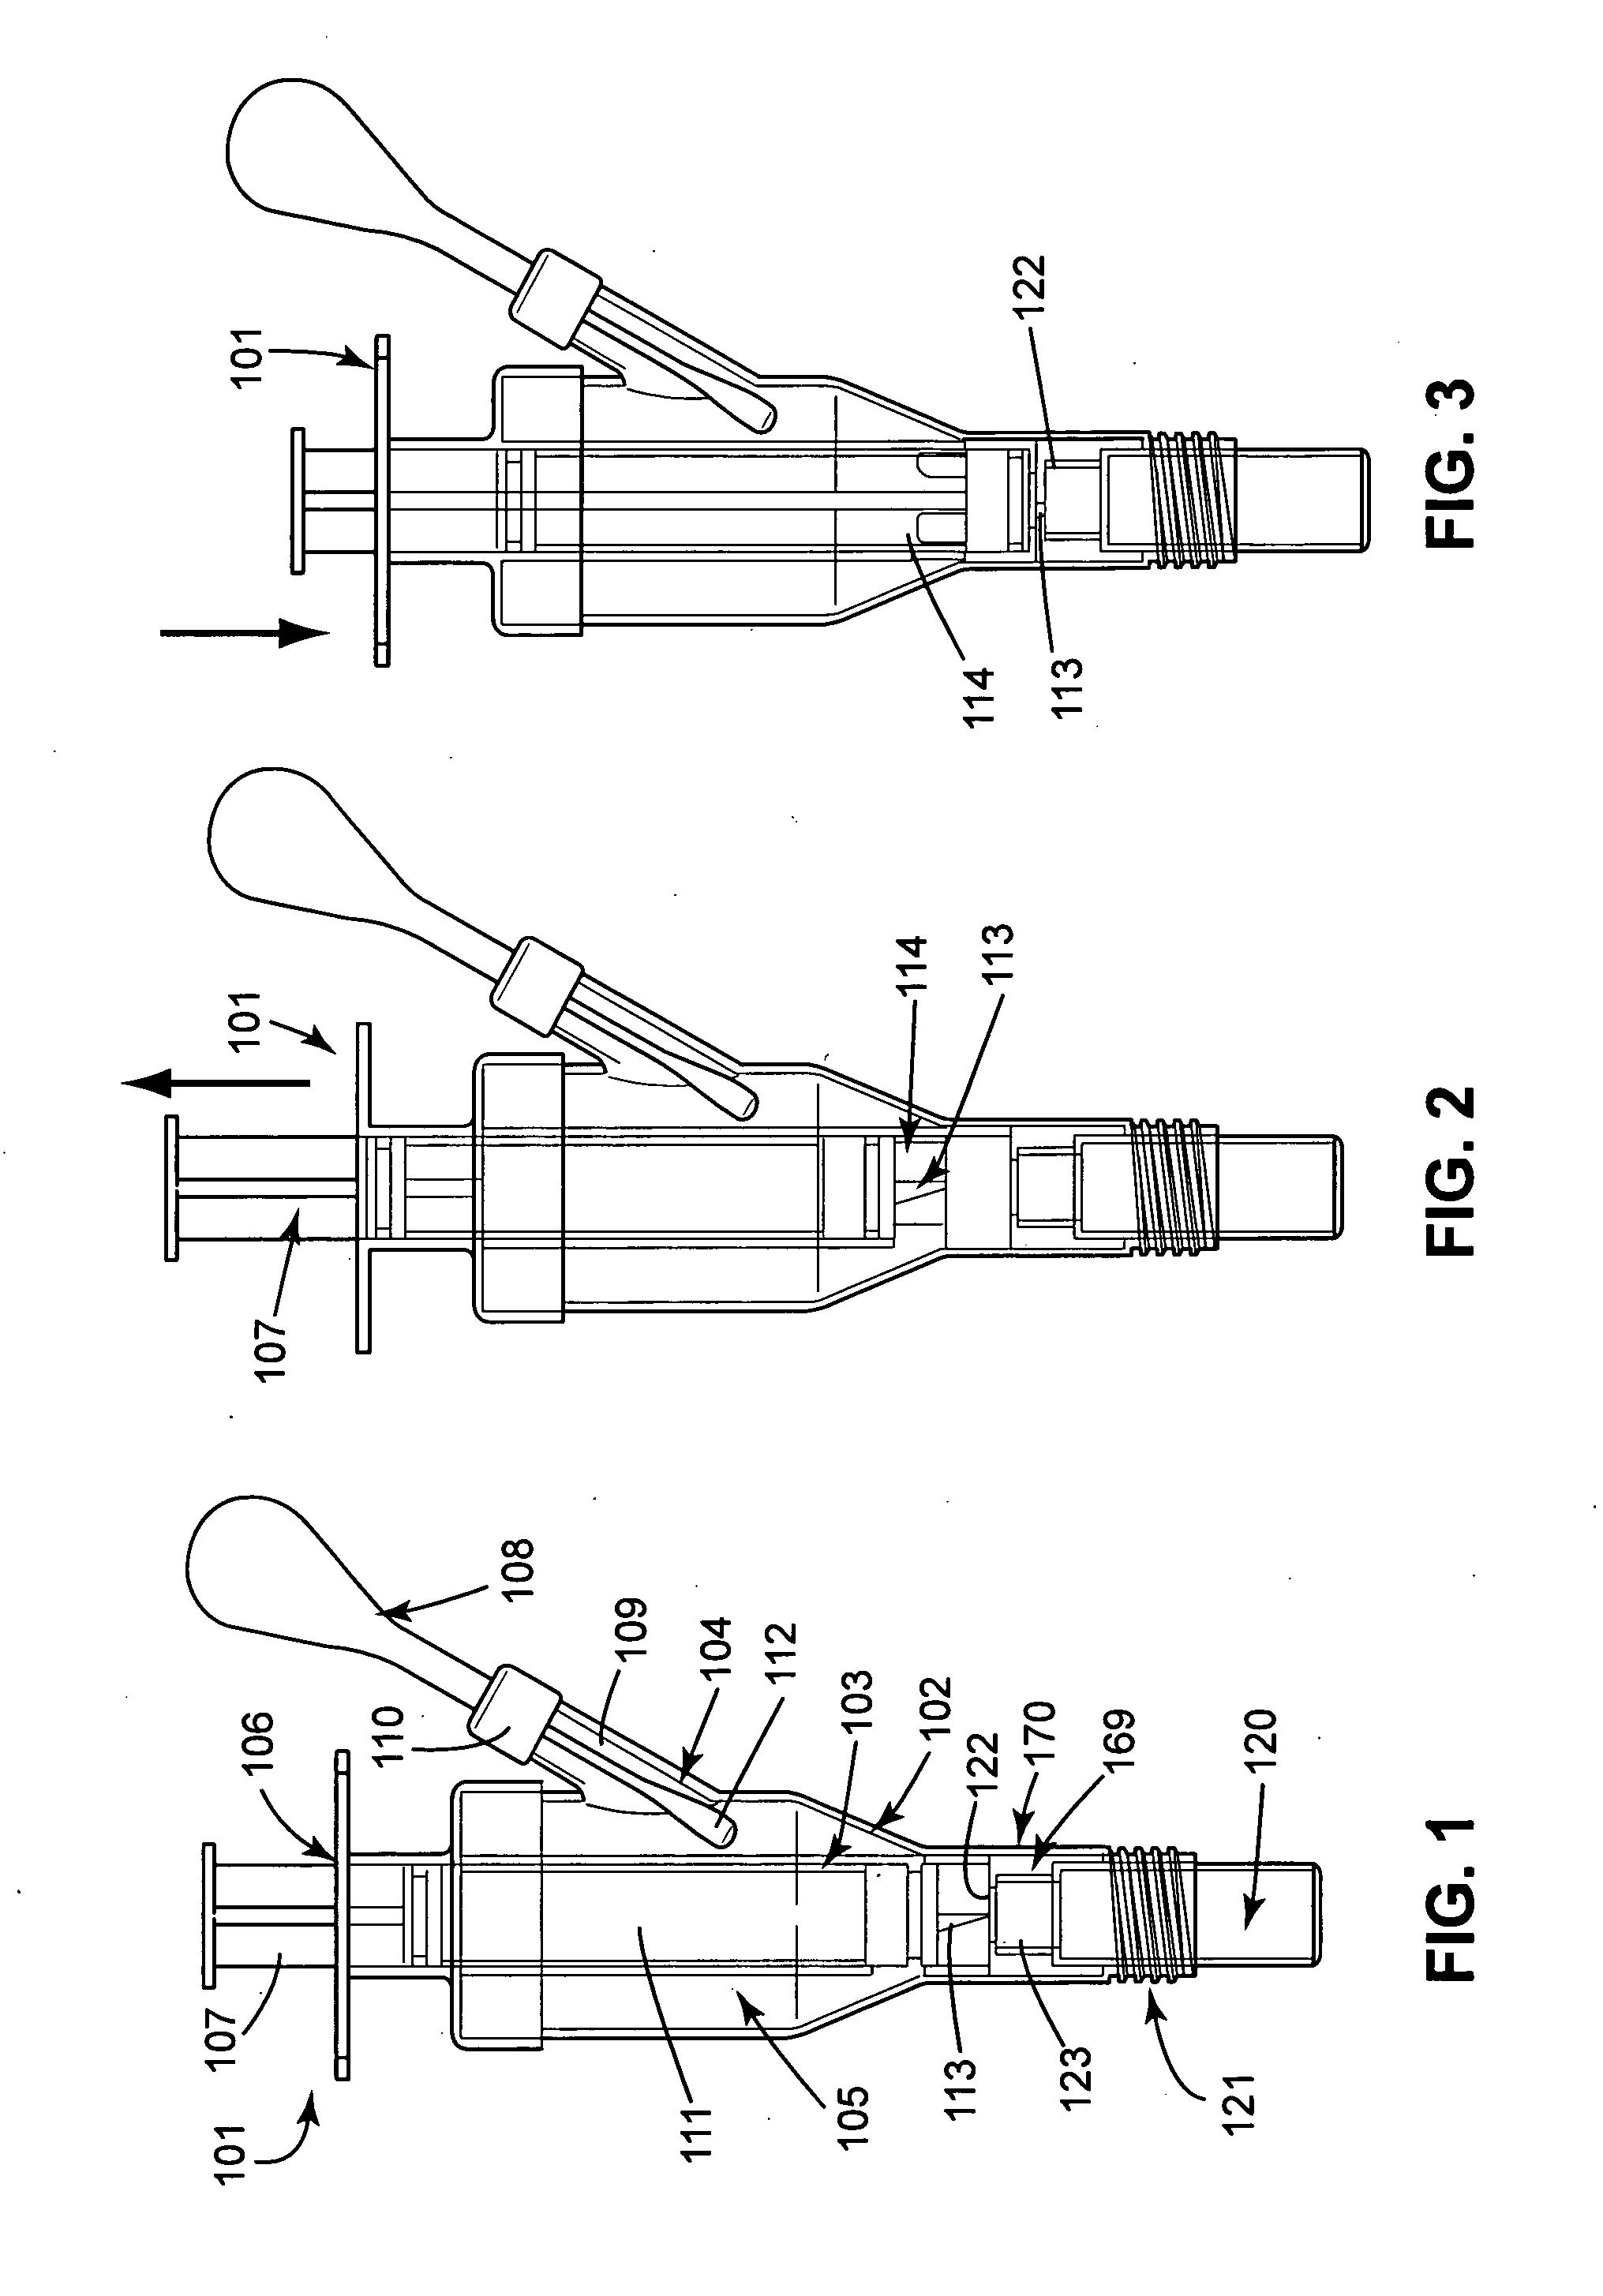 Substance identification apparatus and methods of using